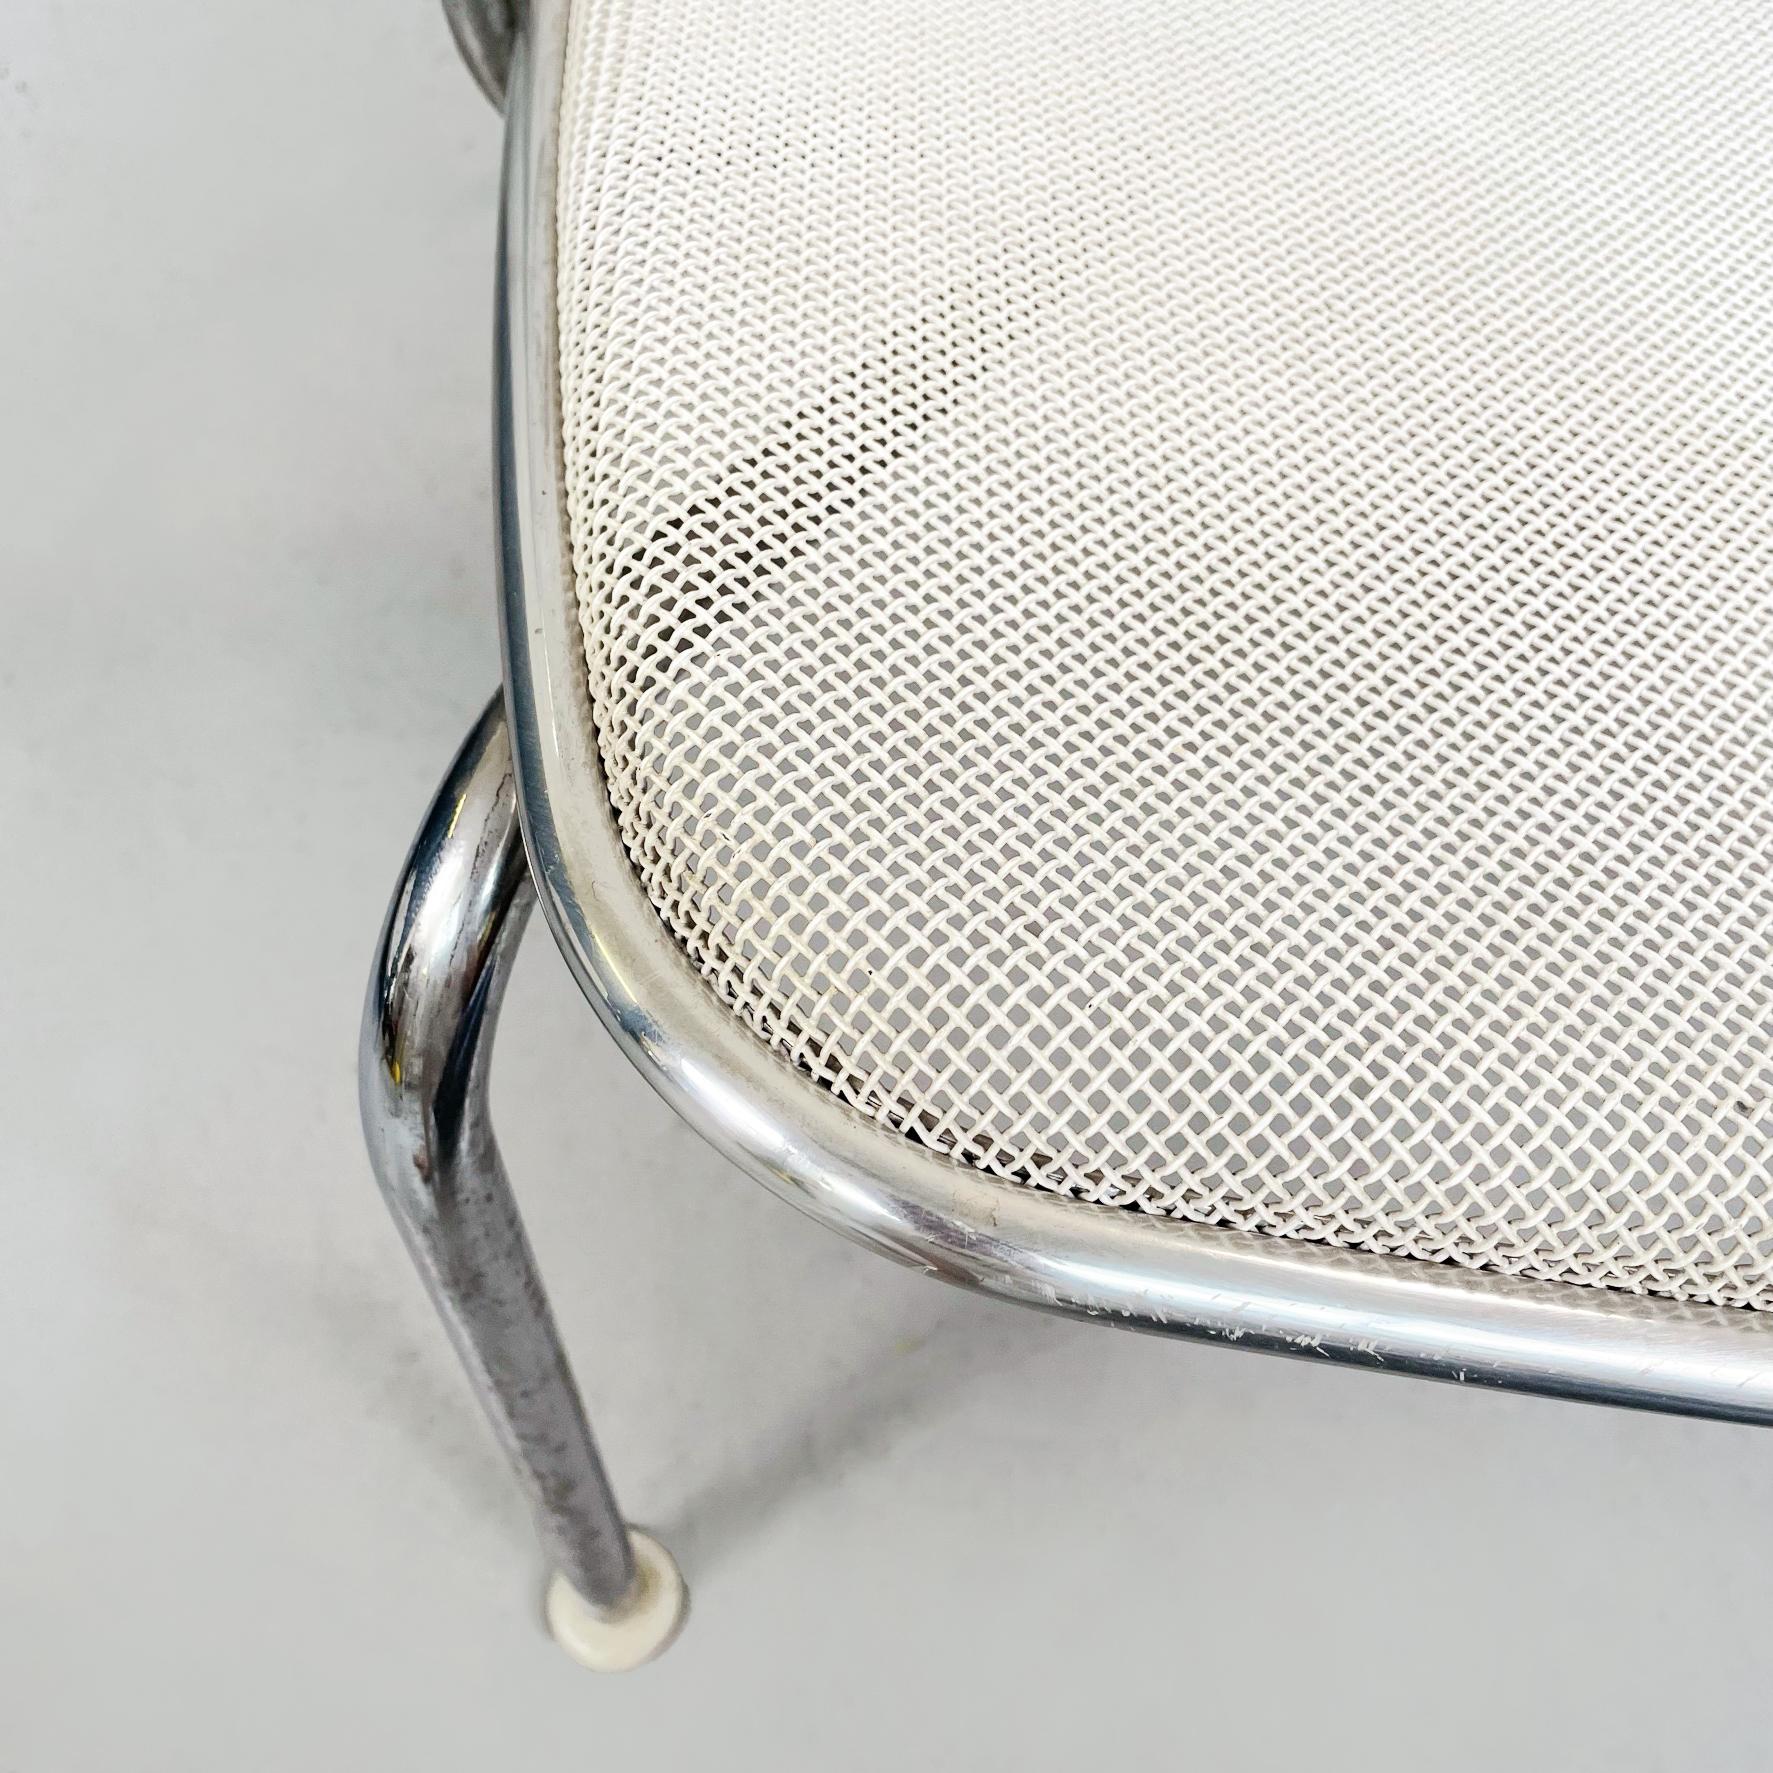 Italian 21st Century White Metal Steel Web Armchairs by Citterio for B&B, 2000s For Sale 4